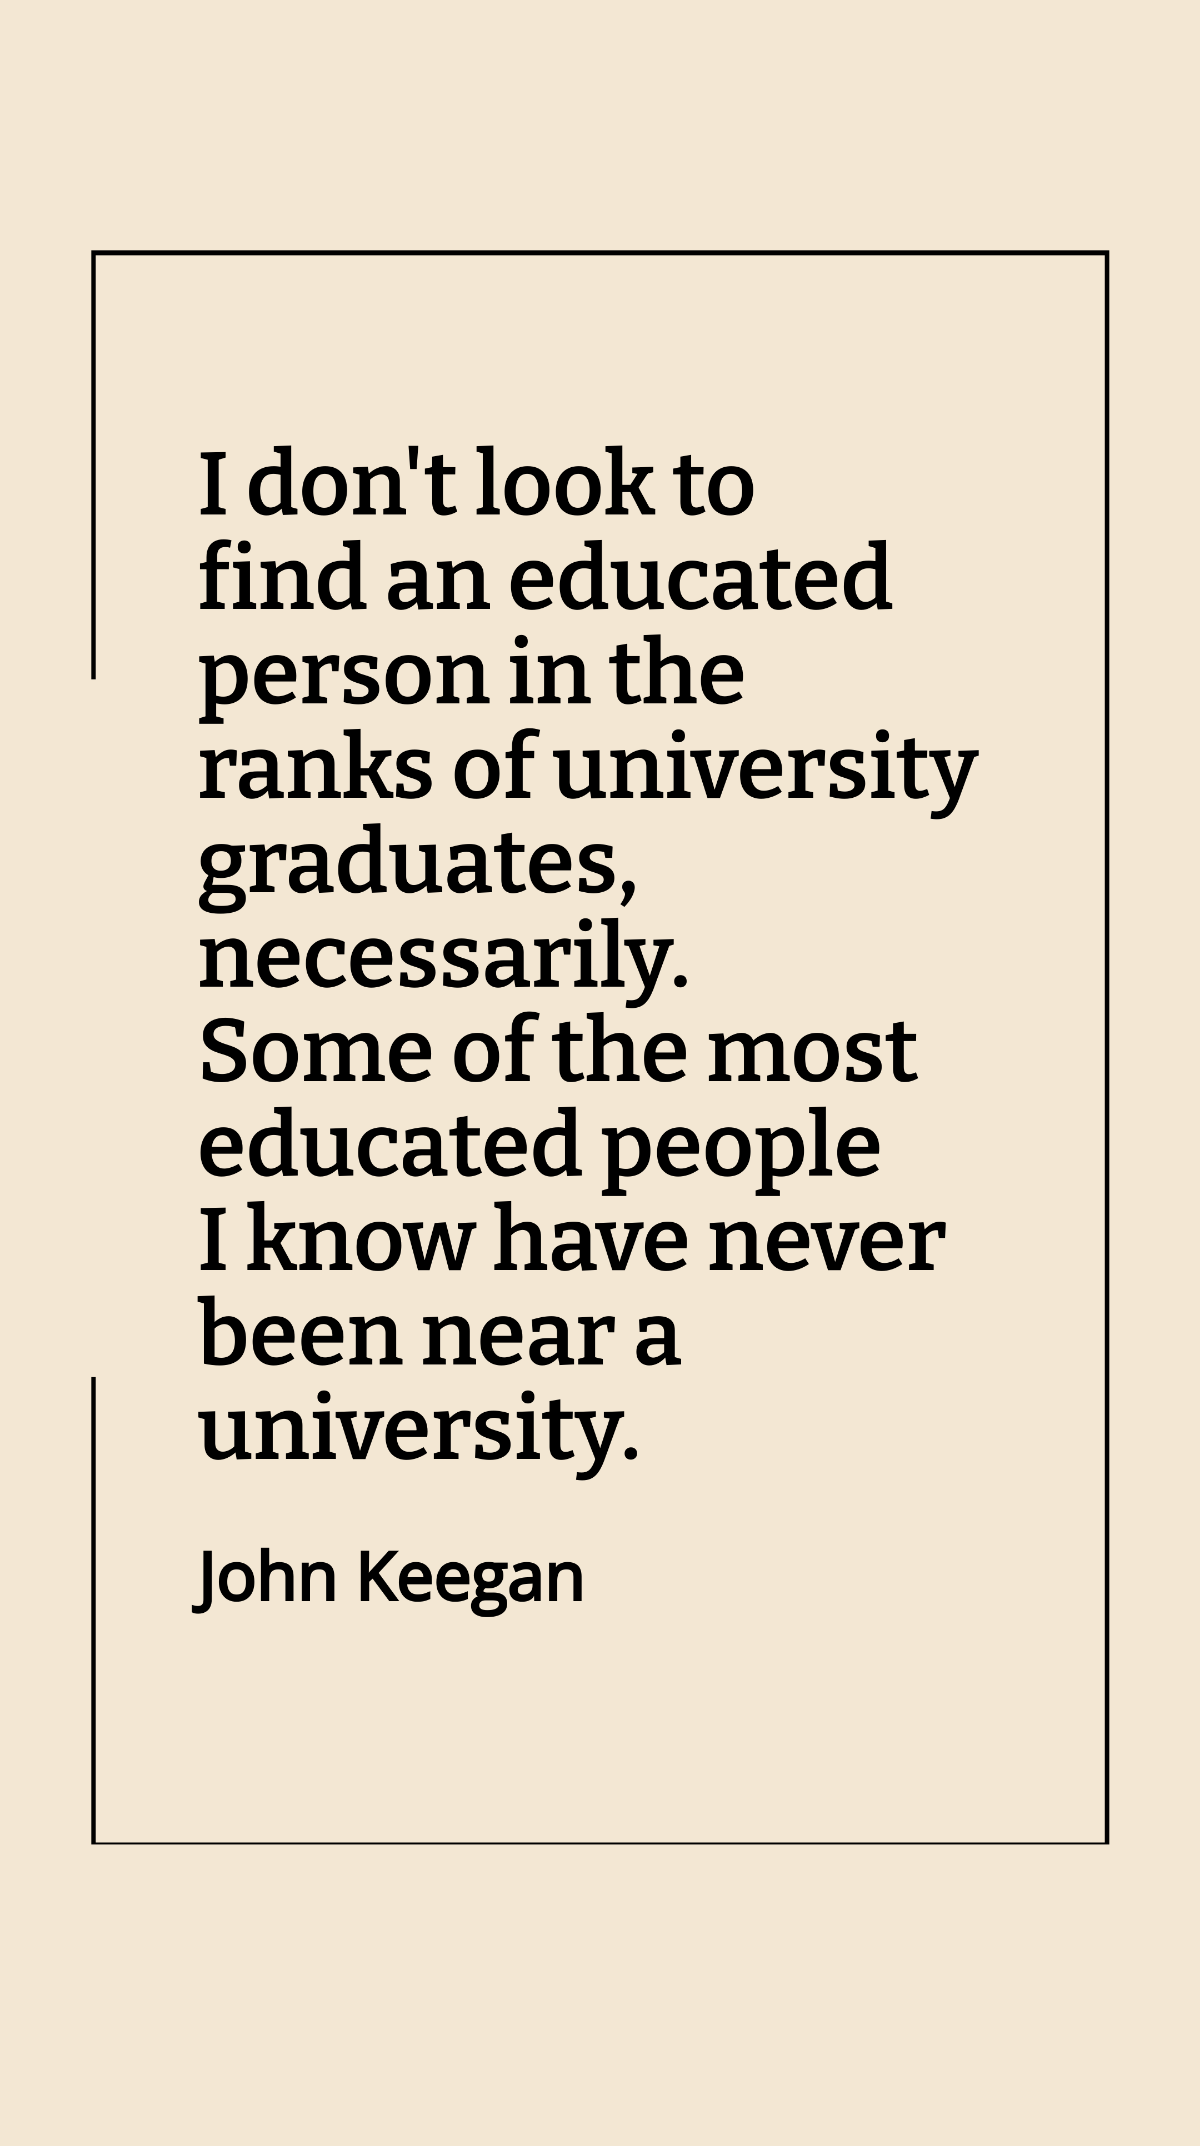 Free John Keegan - I don't look to find an educated person in the ranks of university graduates, necessarily. Some of the most educated people I know have never been near a university. Template